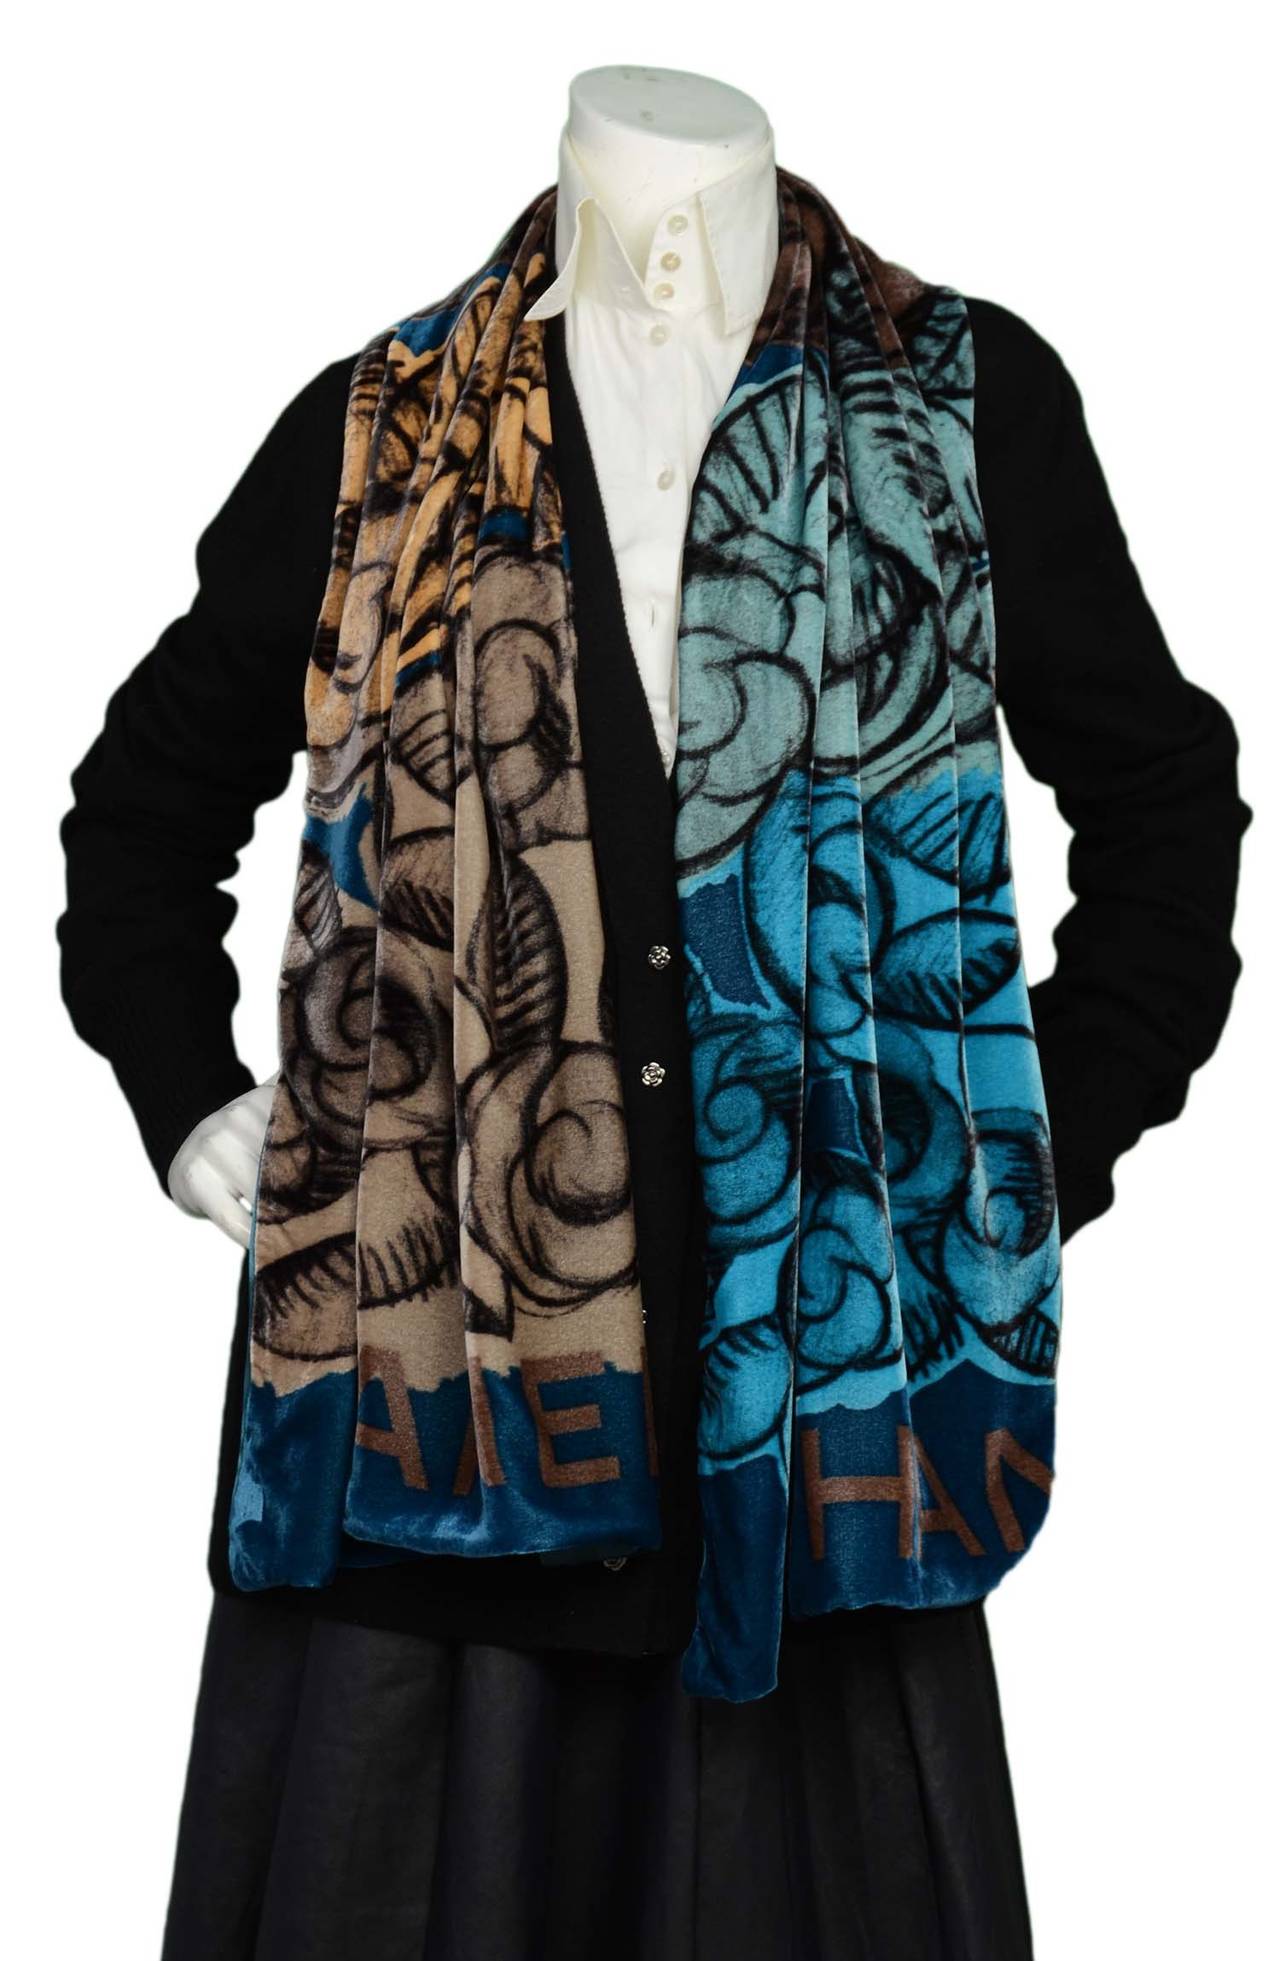 Features floral painted design with CHANEL written in brown letters at both ends of shawl. Back of shawl is solid teal shiny silk that can be worn for a simpler/dressier look.
-Made in: Italy
-Colors: Blue, brown, peach, black
-Composition: Front